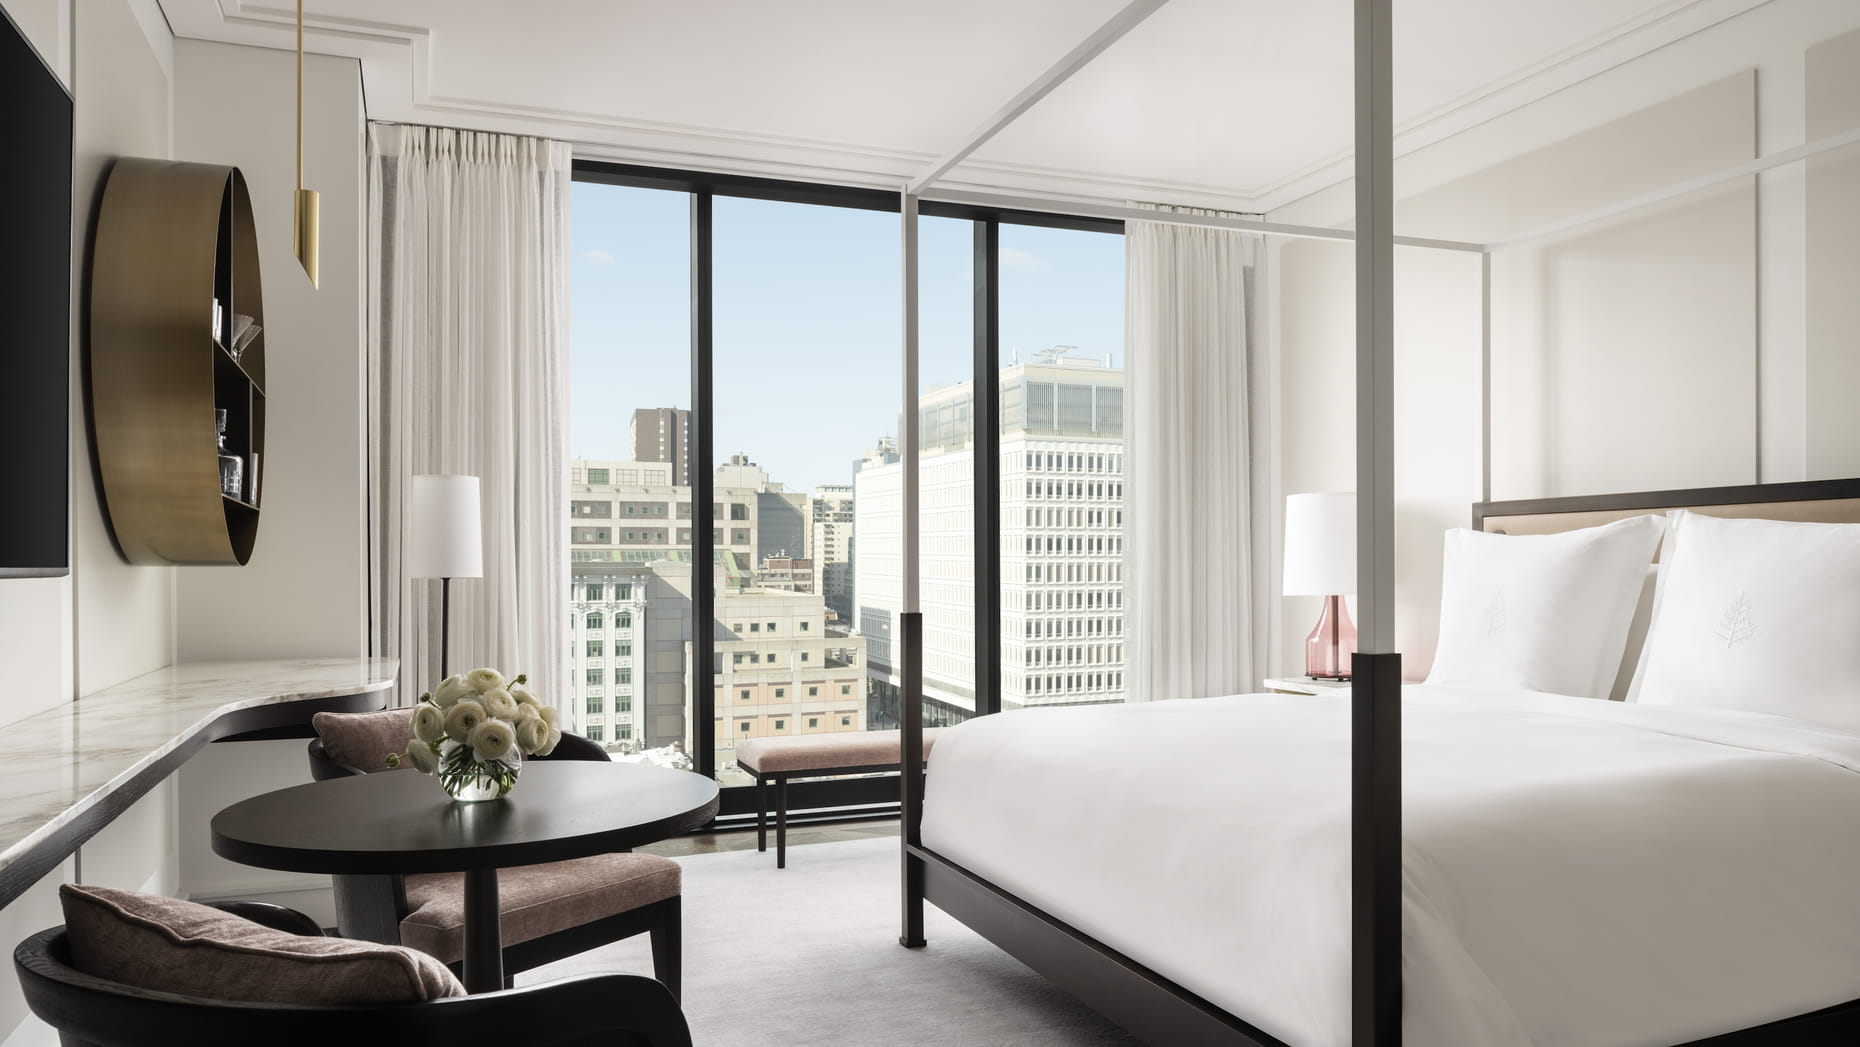 Four Seasons Hotel Montreal luxury hotels in Montreals bedroom with city views